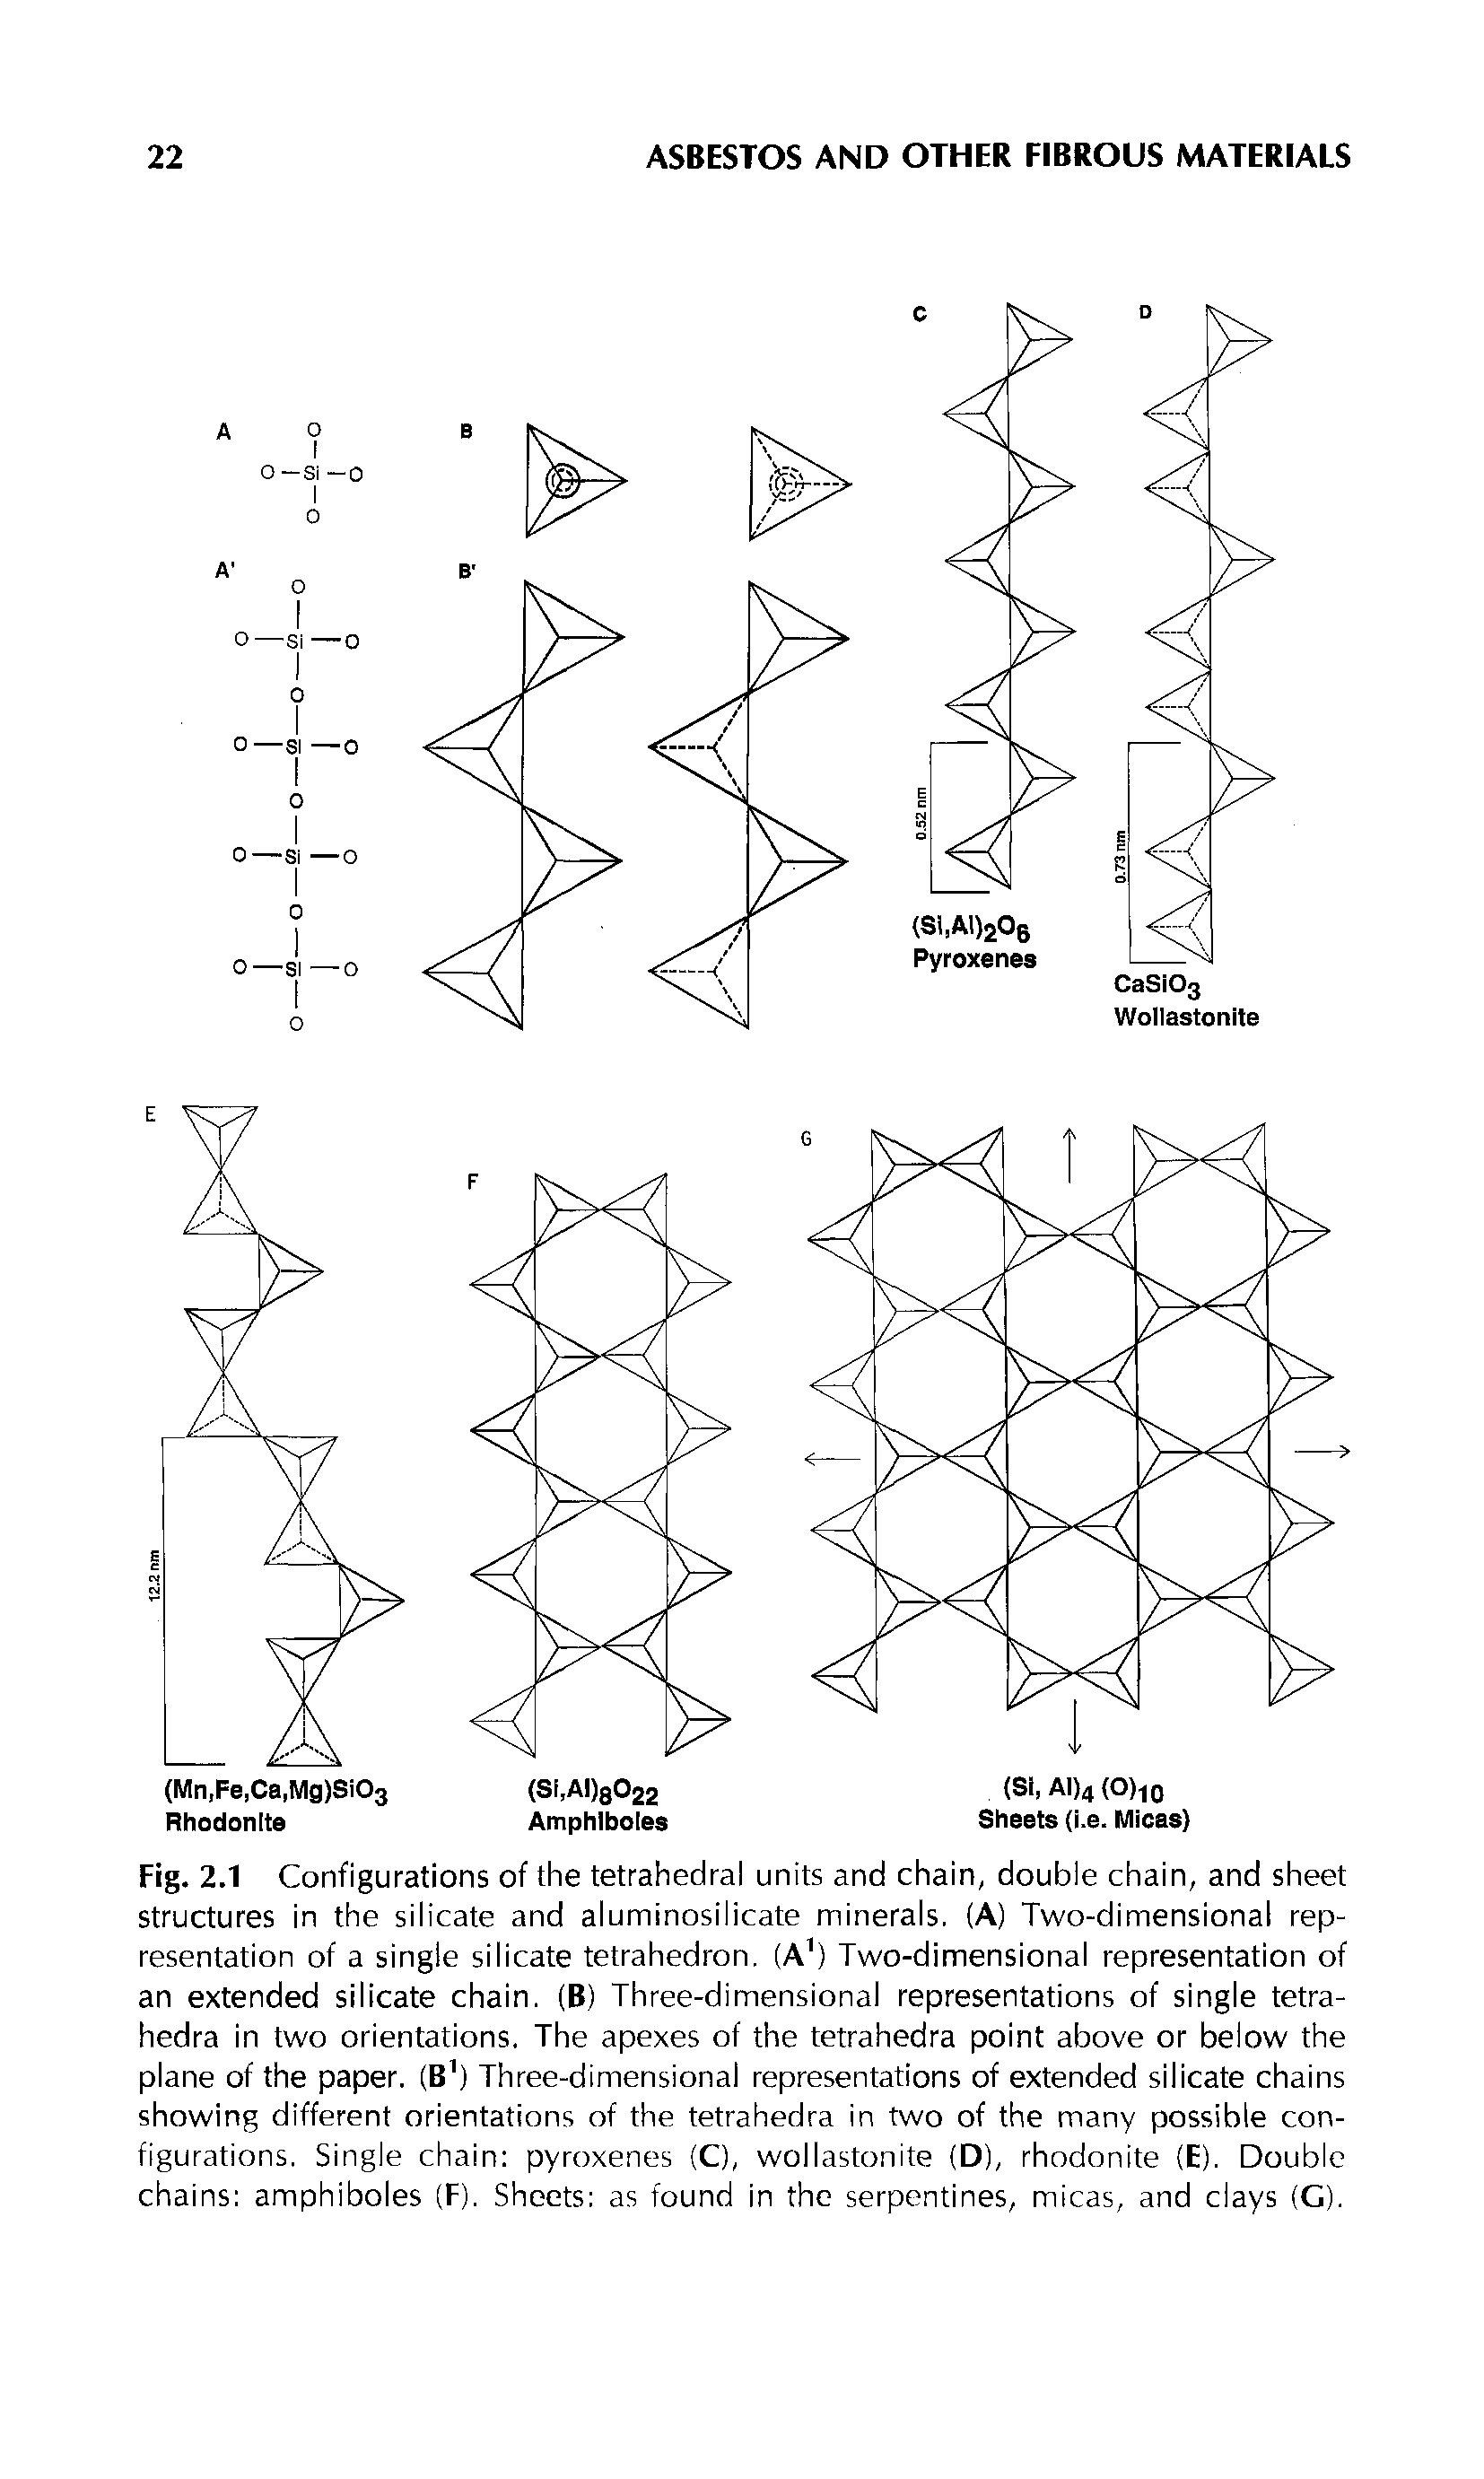 Fig. 2.1 Configurations of the tetrahedral units and chain, double chain, and sheet structures in the silicate and aluminosilicate minerals. (A) Two-dimensional representation of a single silicate tetrahedron. (A ) Two-dimensional representation of an extended silicate chain. (B) Three-dimensional representations of single tetra-hedra in two orientations. The apexes of the tetrahedra point above or below the plane of the paper. (B ) Three-dimensional representations of extended silicate chains showing different orientations of the tetrahedra in two of the many possible configurations. Single chain pyroxenes (C), wollastonite (D), rhodonite (E). Double chains amphiboles (F). Sheets as found in the serpentines, micas, and clays (G).